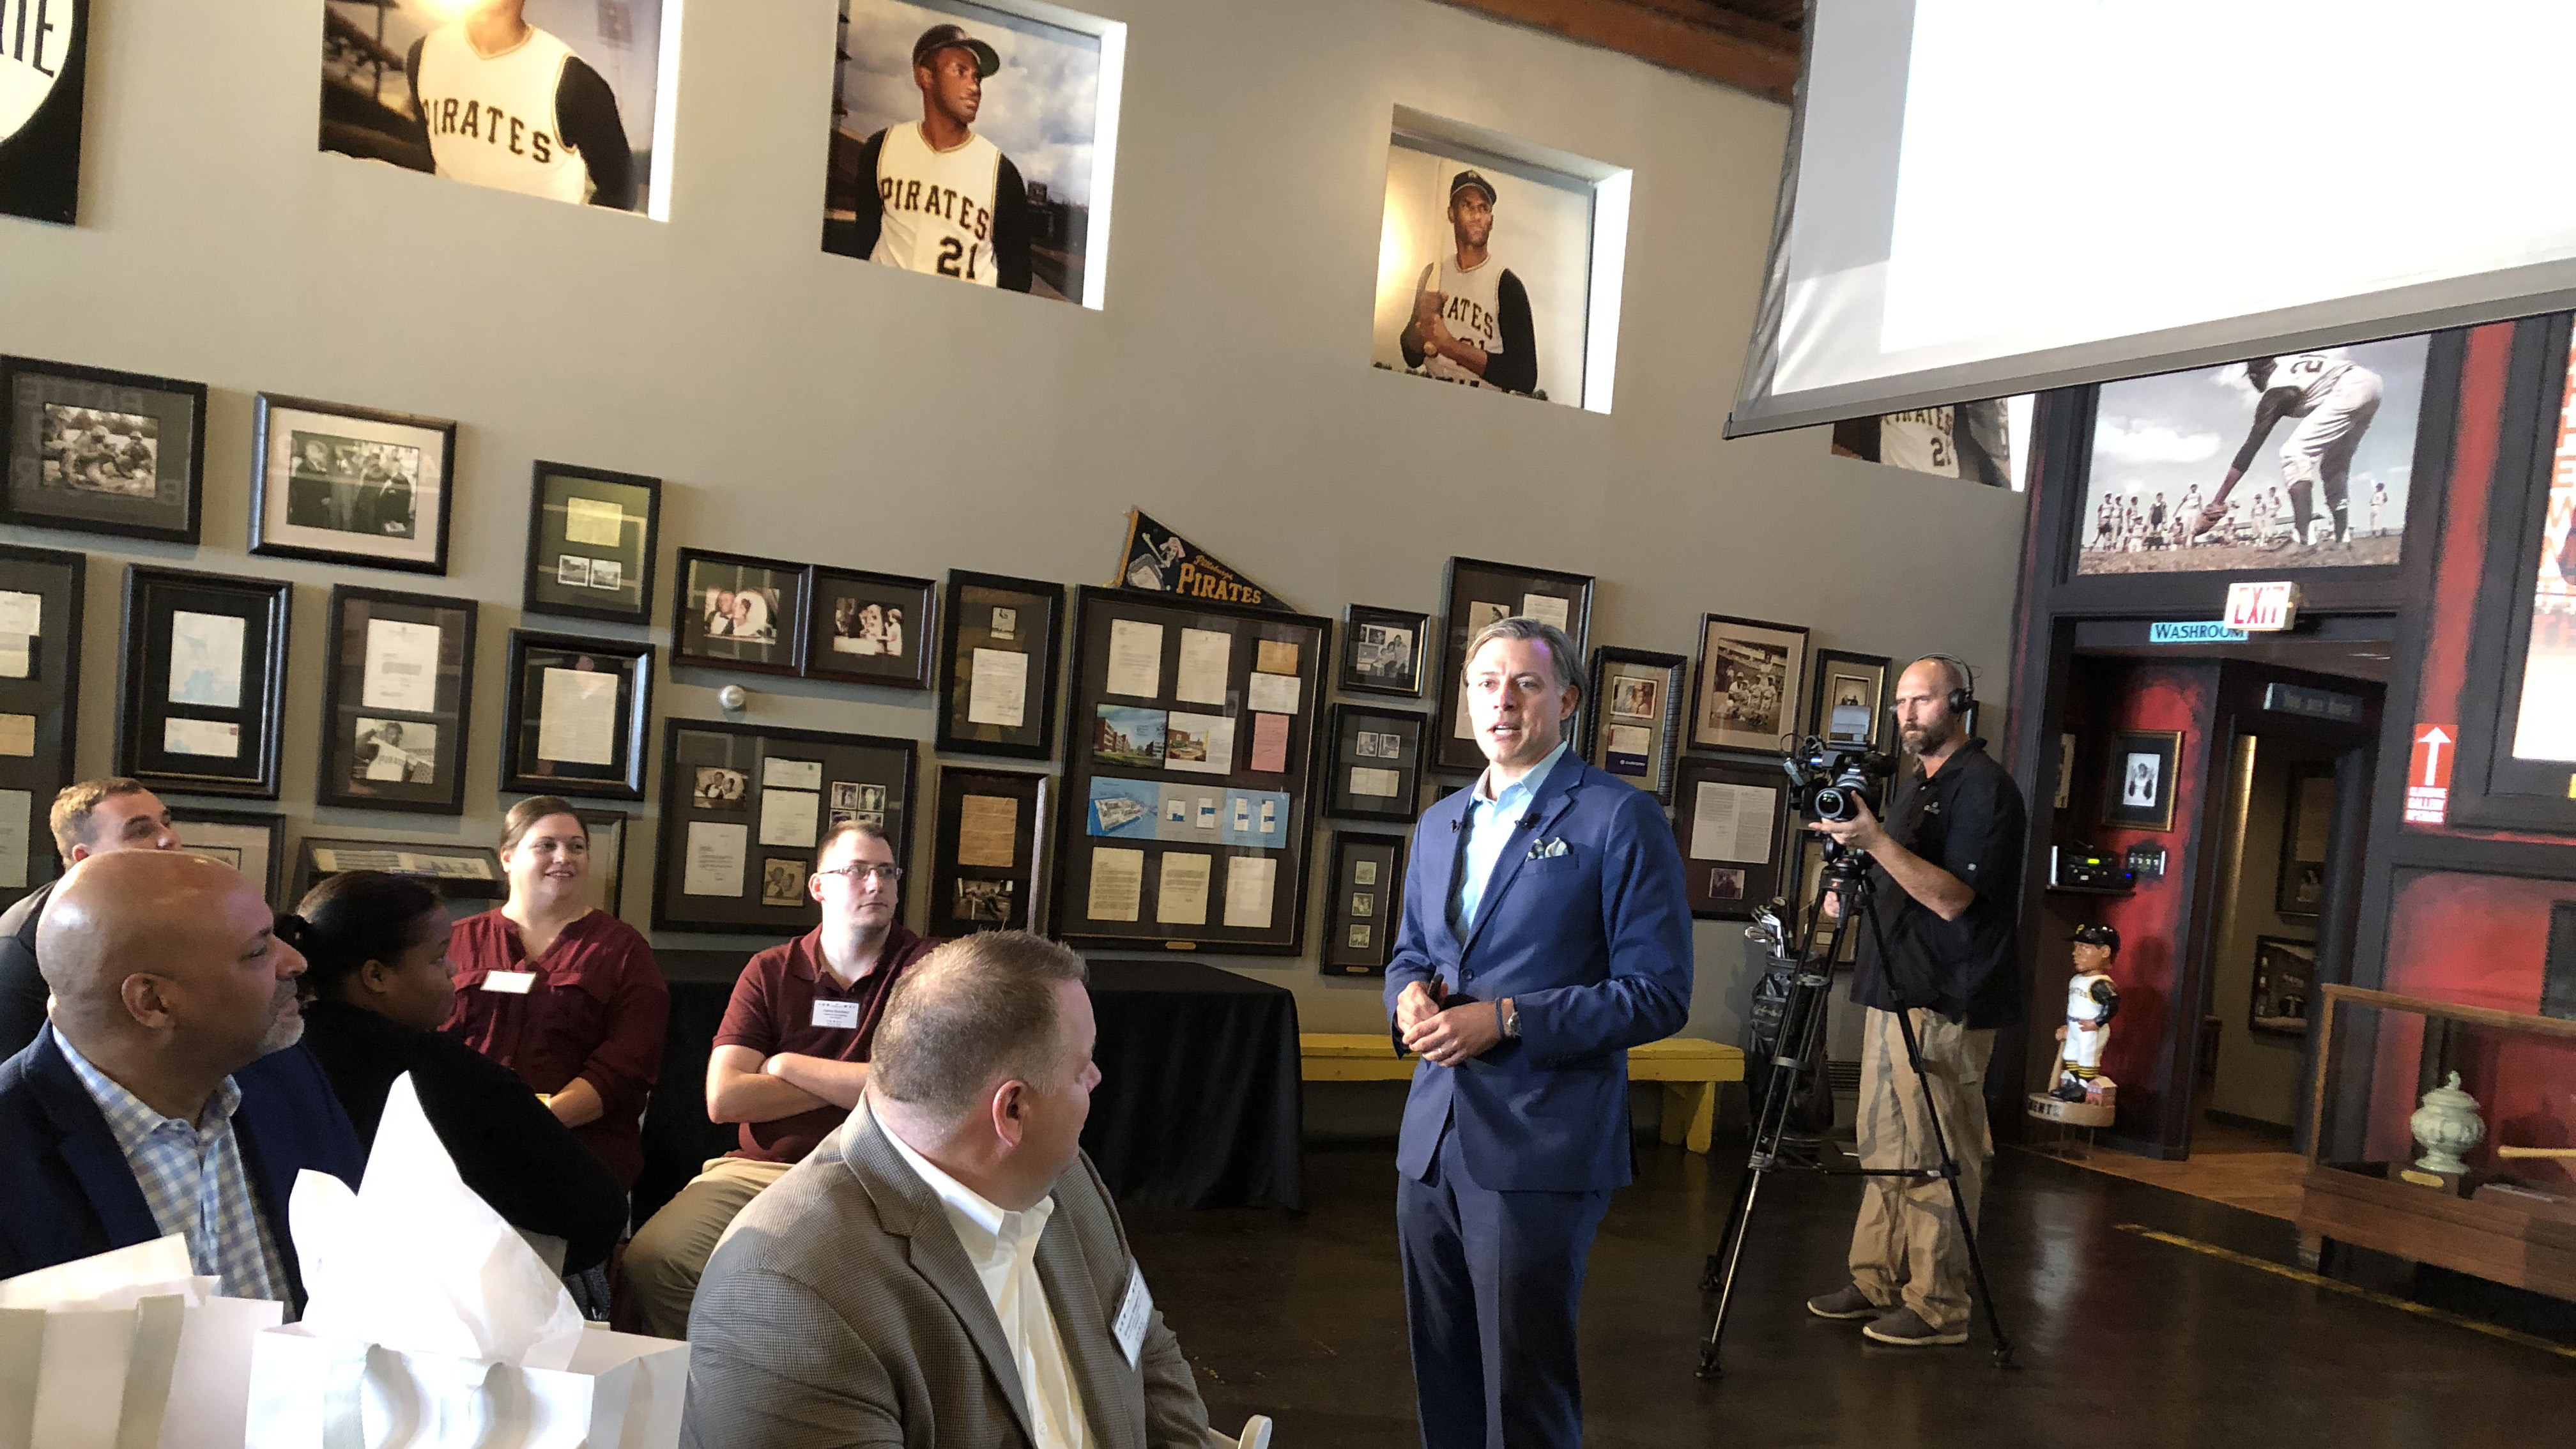 Attendees at the 2019 Military Challenge Grant Event at the Roberto Clemente Museum in Pittsburgh.